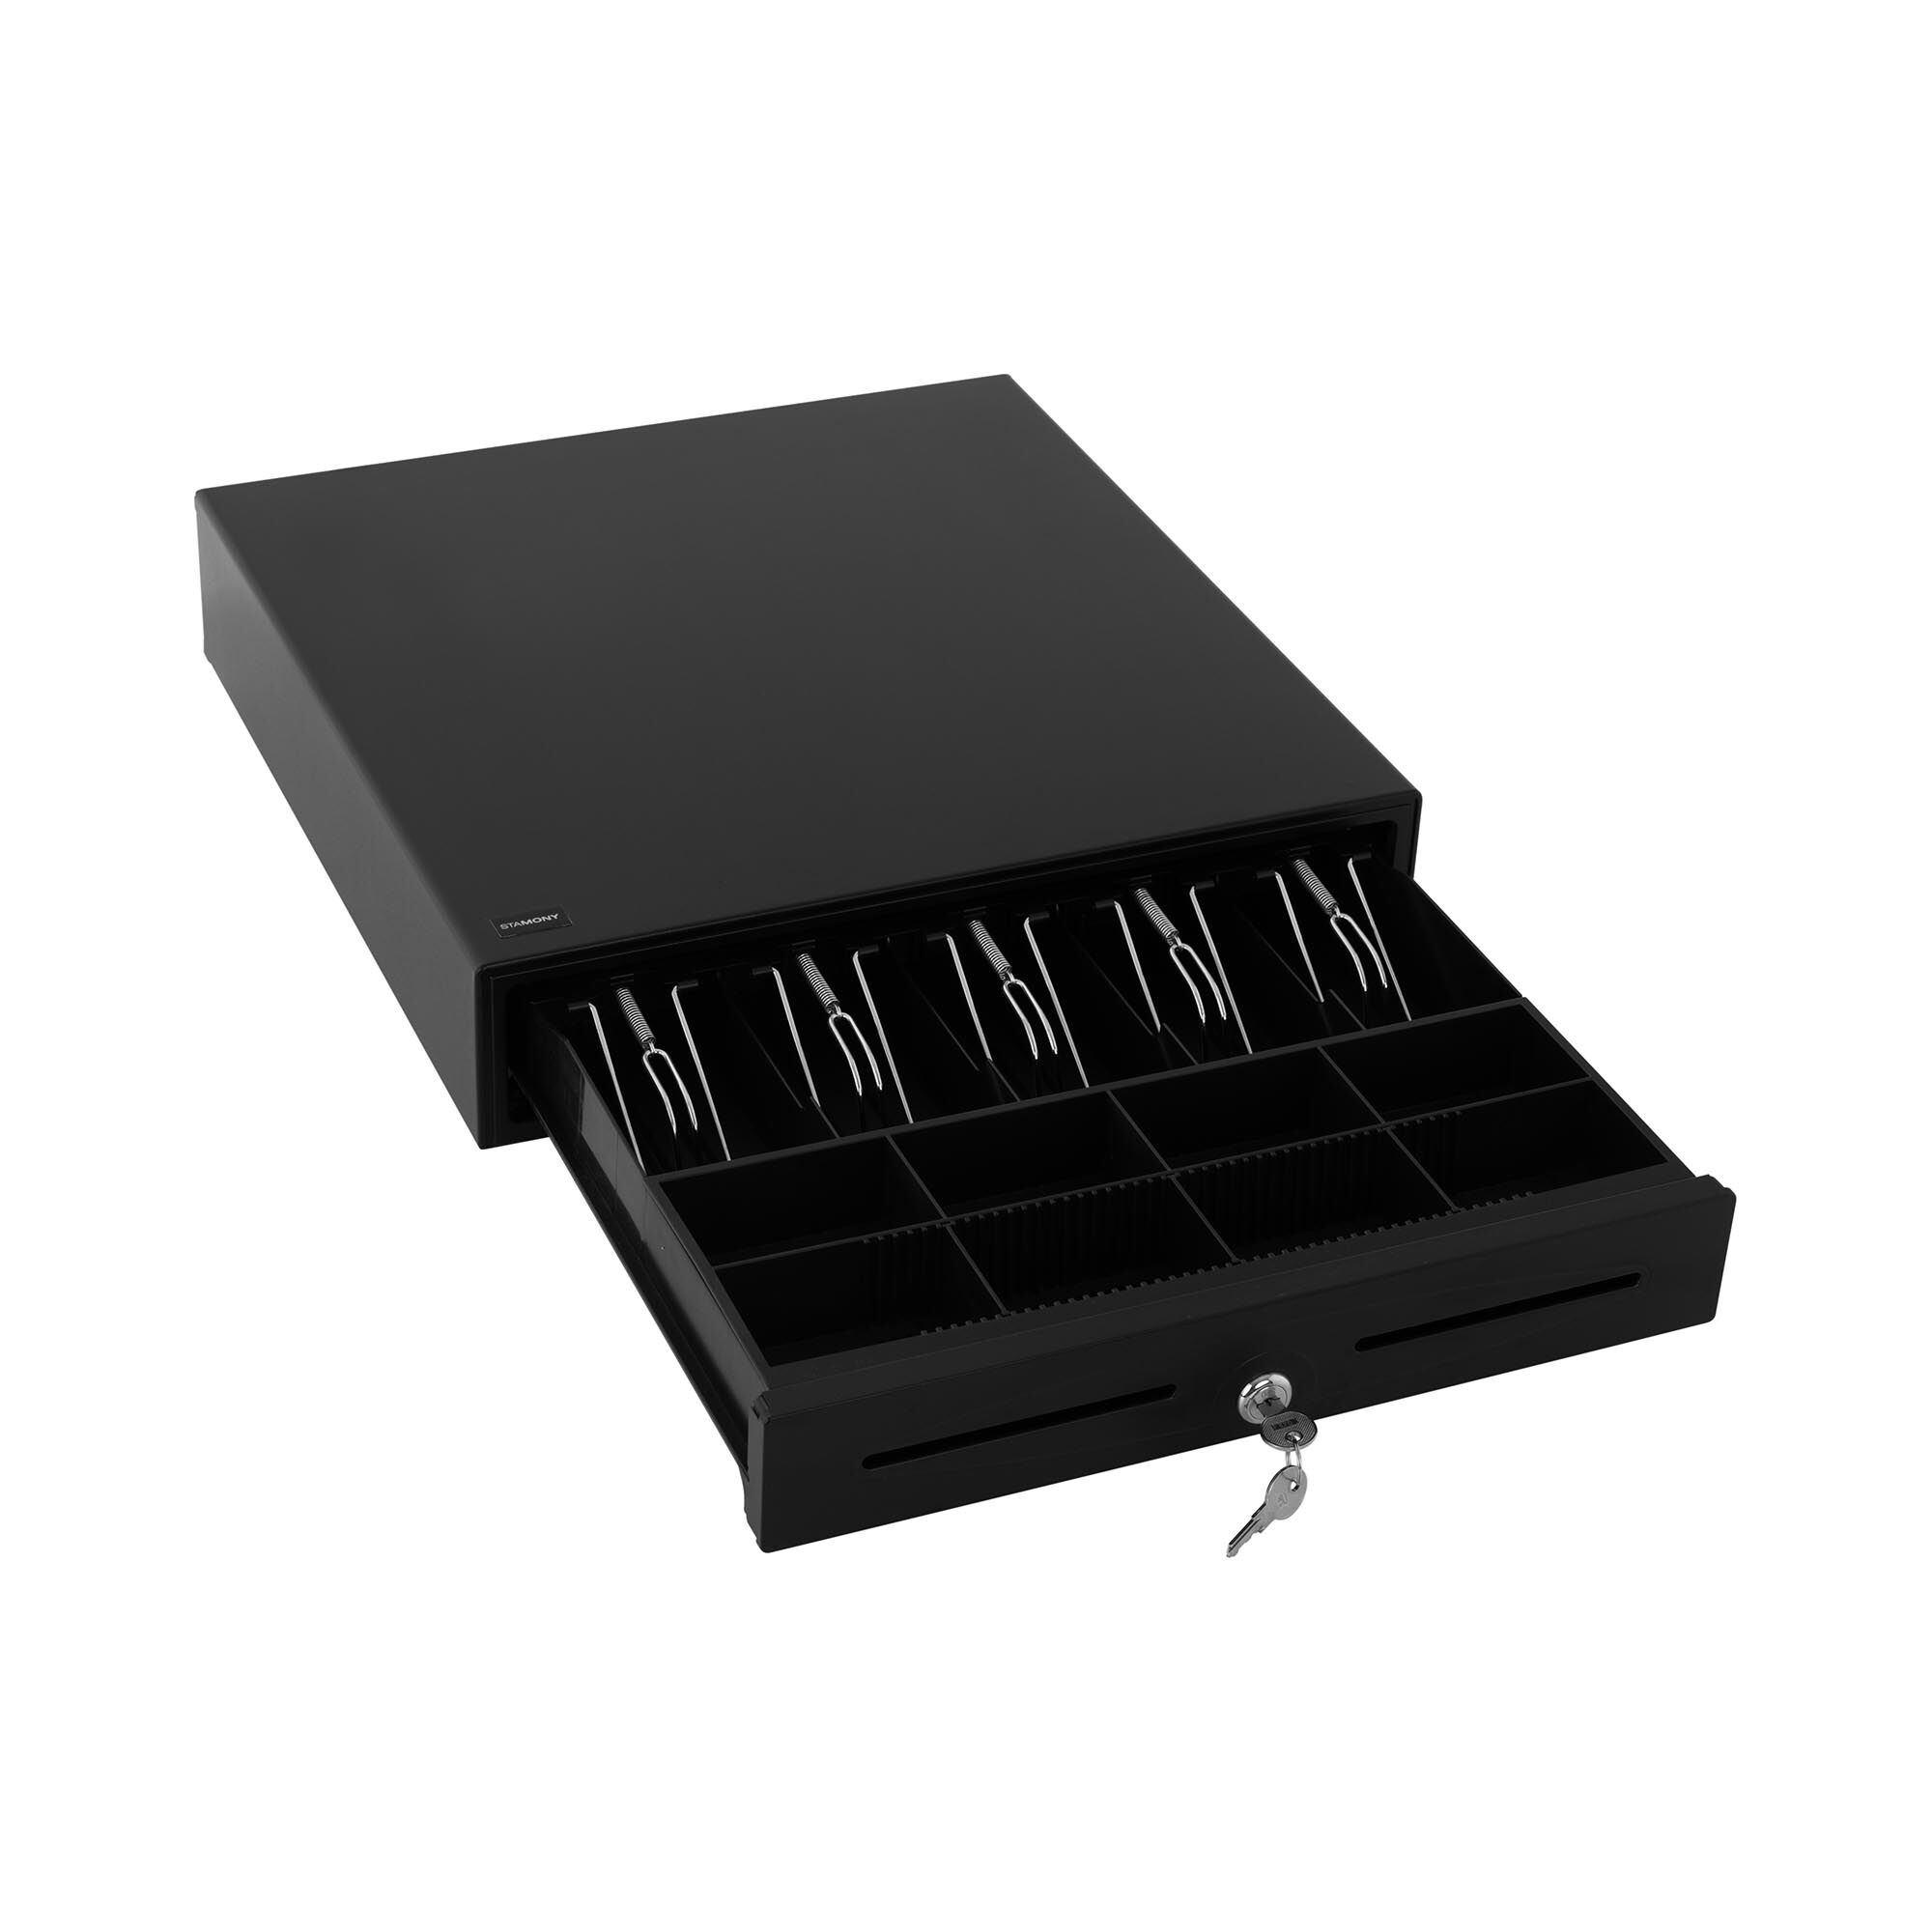 Stamony Cash Register Drawer - 8 coin slots - 5 note trays